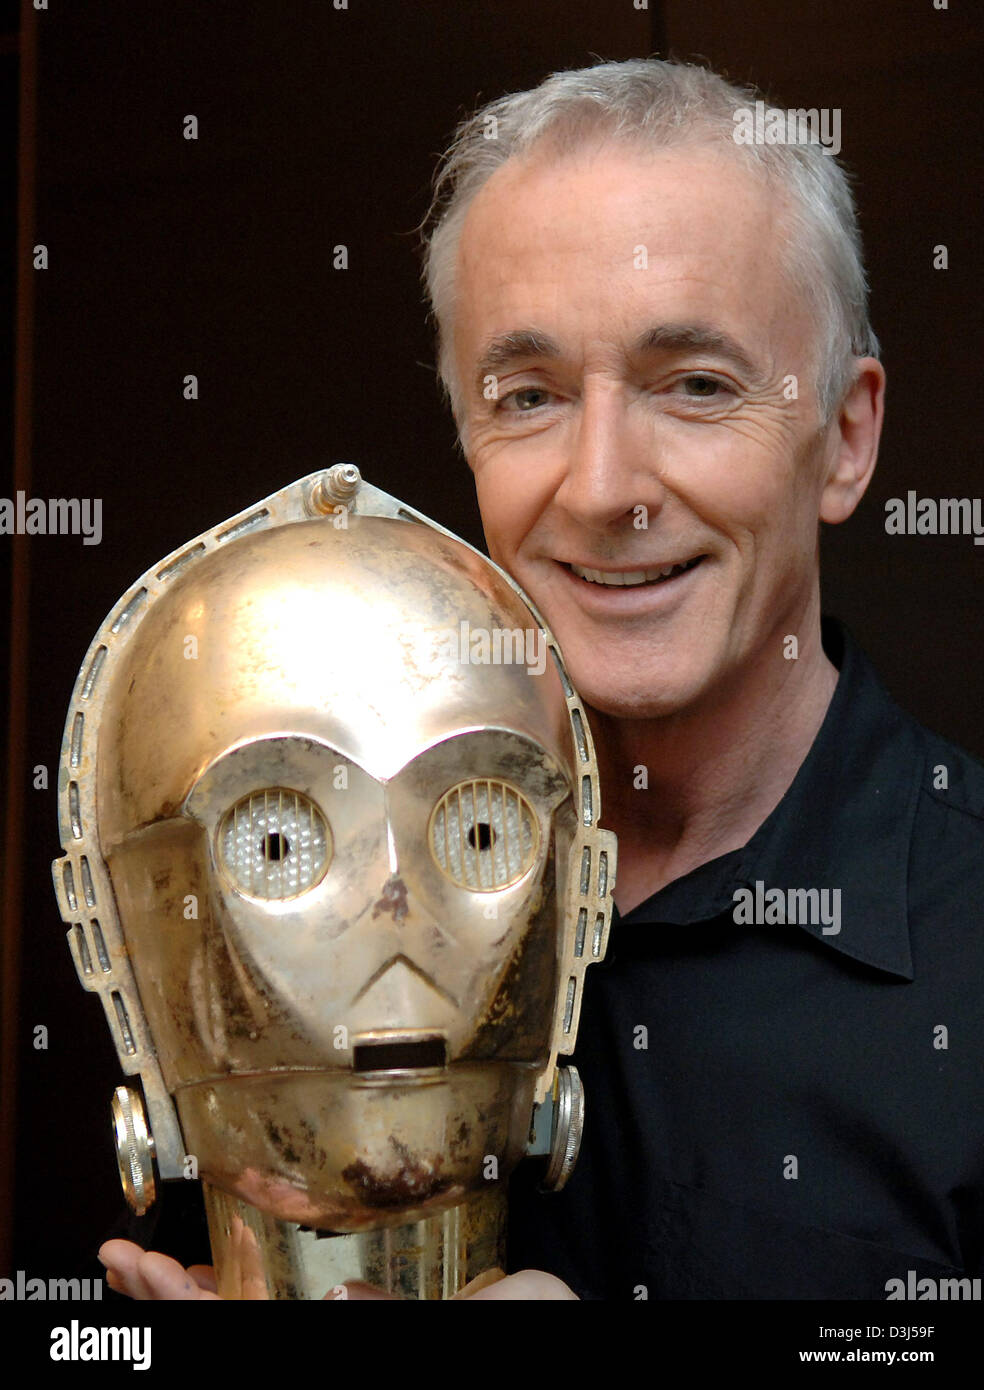 (dpa files) - British actor Anthony Daniels presents the mask of the robot C3PO which he plays in the 'Star Wars' - films since 1977 during a dpa-interview in Stuttgart, Germany. Although his face disappears behind the mask, the actor consideres the part as an artistic challenge, for the awkward air of the robot with its philosophic side notes has profound human lineaments. Stock Photo